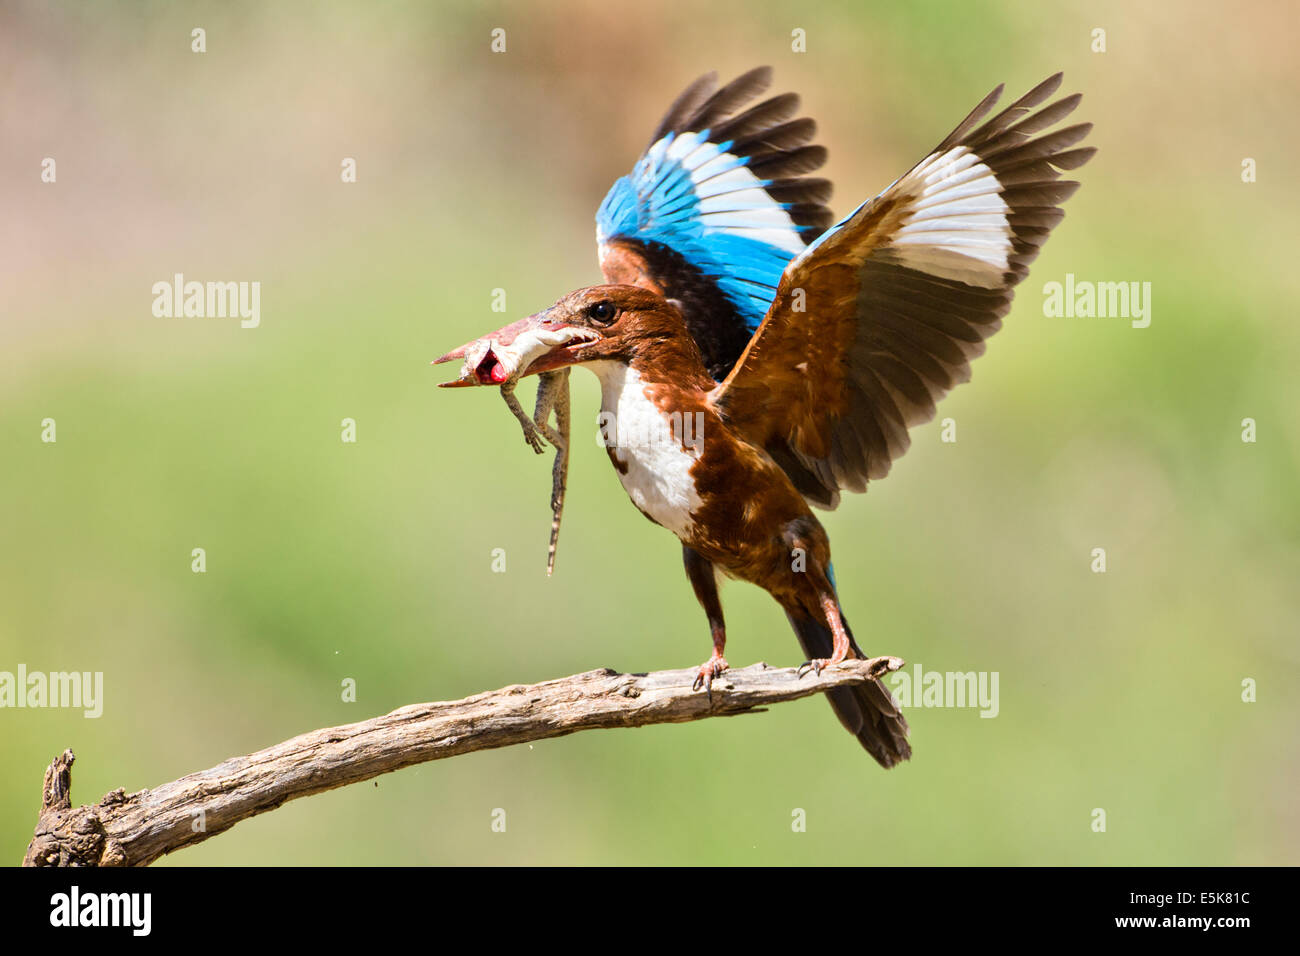 White-throated Kingfisher (Halcyon smyrnensis) with a lizard in its beak, Photographed in Israel Stock Photo